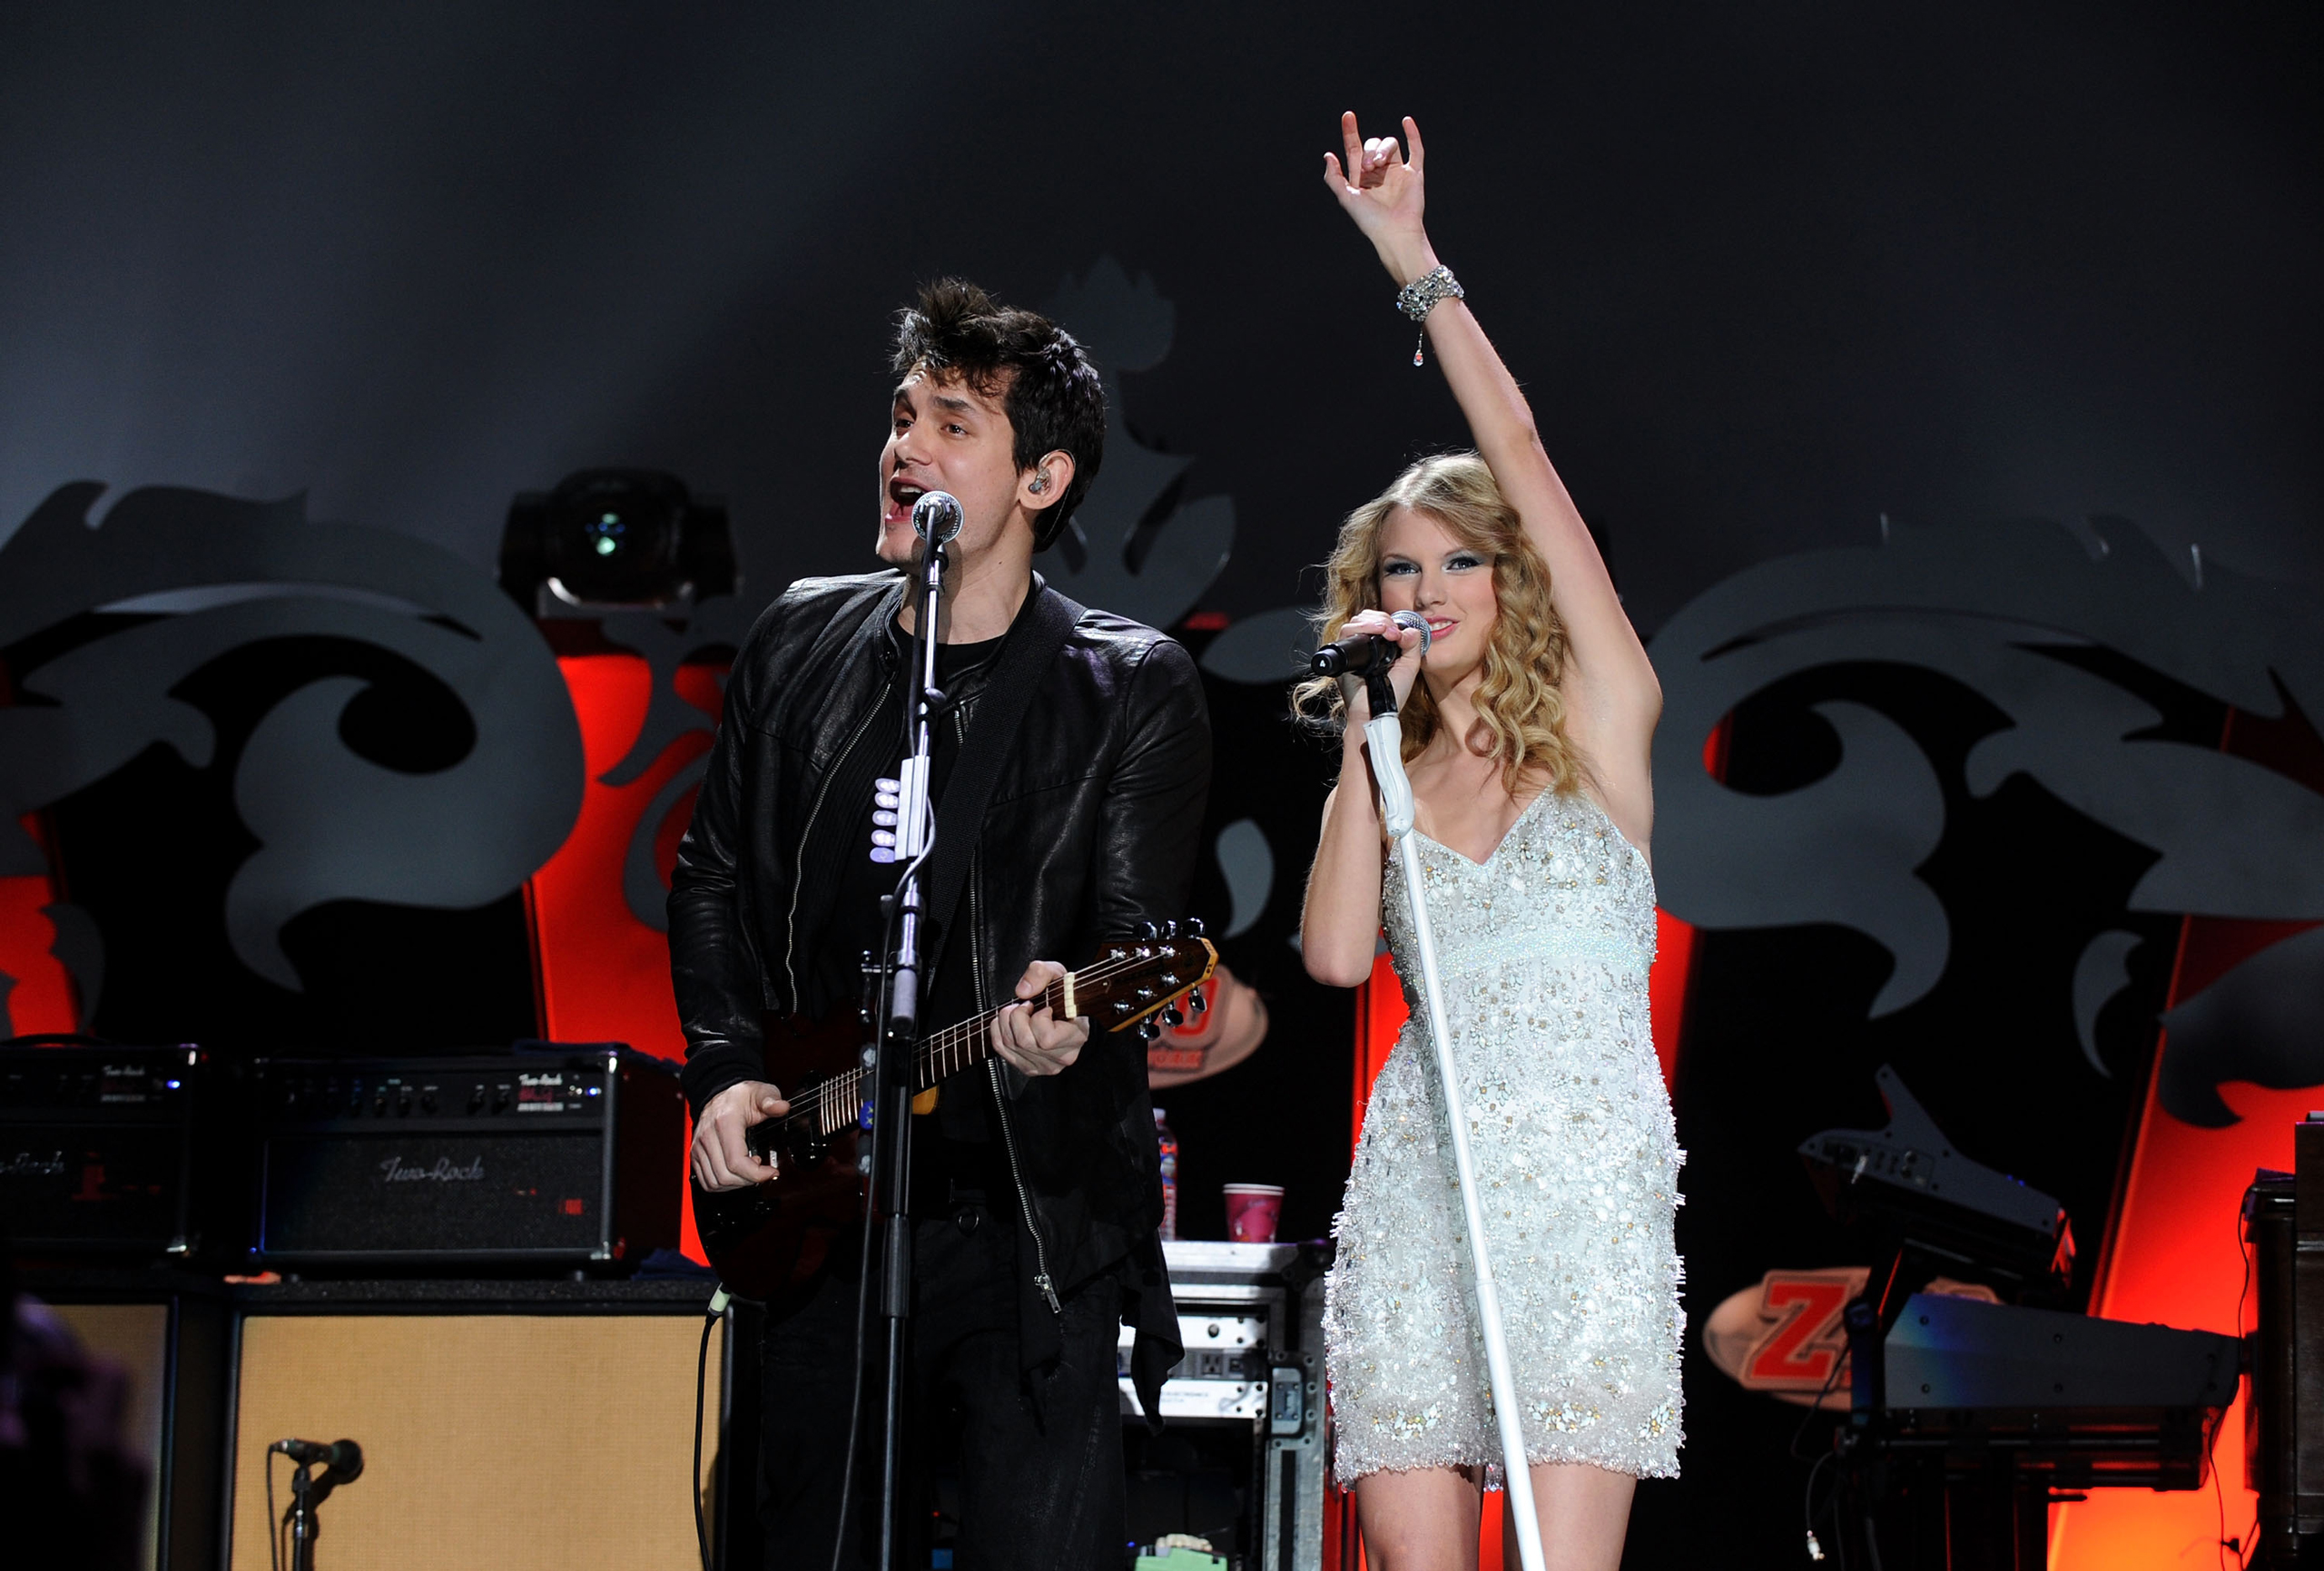 John Mayer and Taylor Swift perform onstage during Z100's Jingle Ball 2009 presented by H&amp;M at Madison Square Garden in New York on Dec. 11, 2009. (Theo Wargo—WireImage)